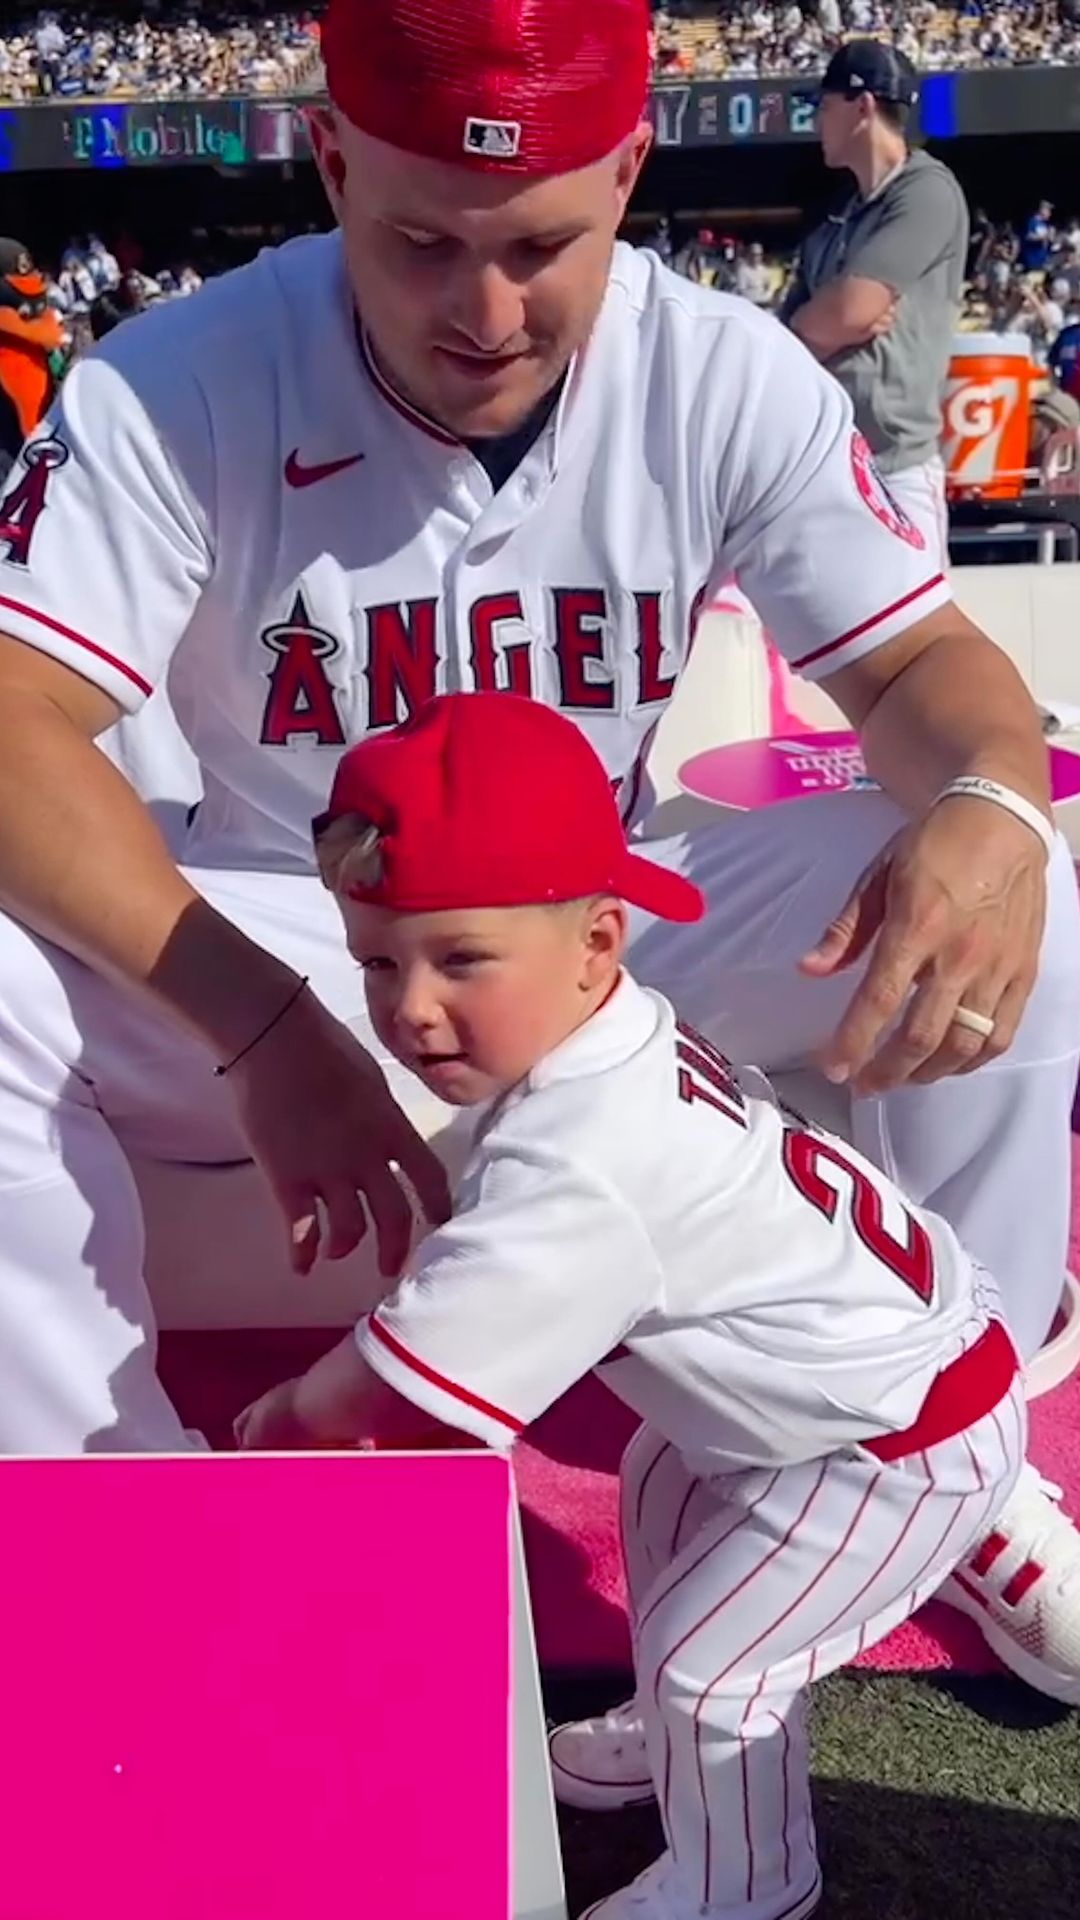 @miketrout definitely brought the best BAT to the Home Run Derby...